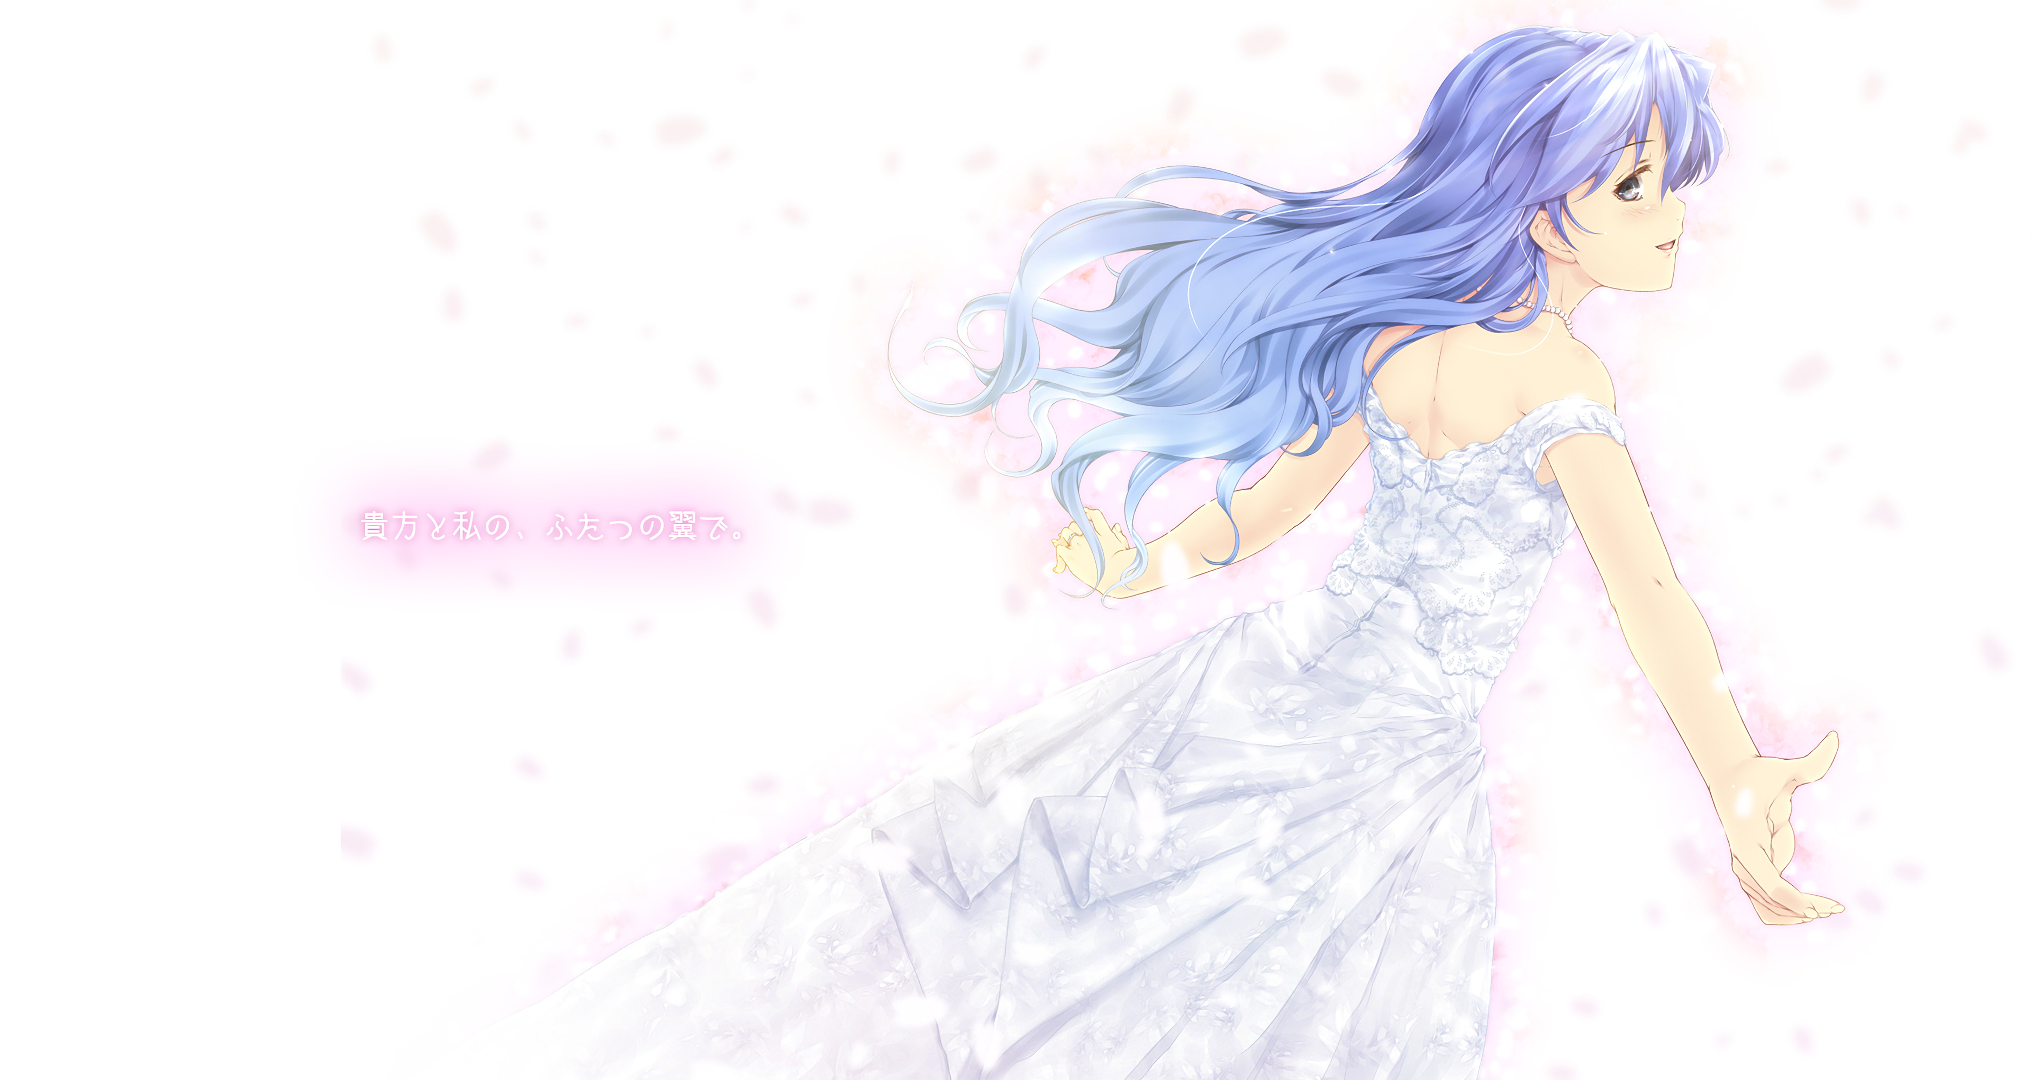 Anime character Chihaya Kisaragi from The iDOLM@STER in a desktop wallpaper.